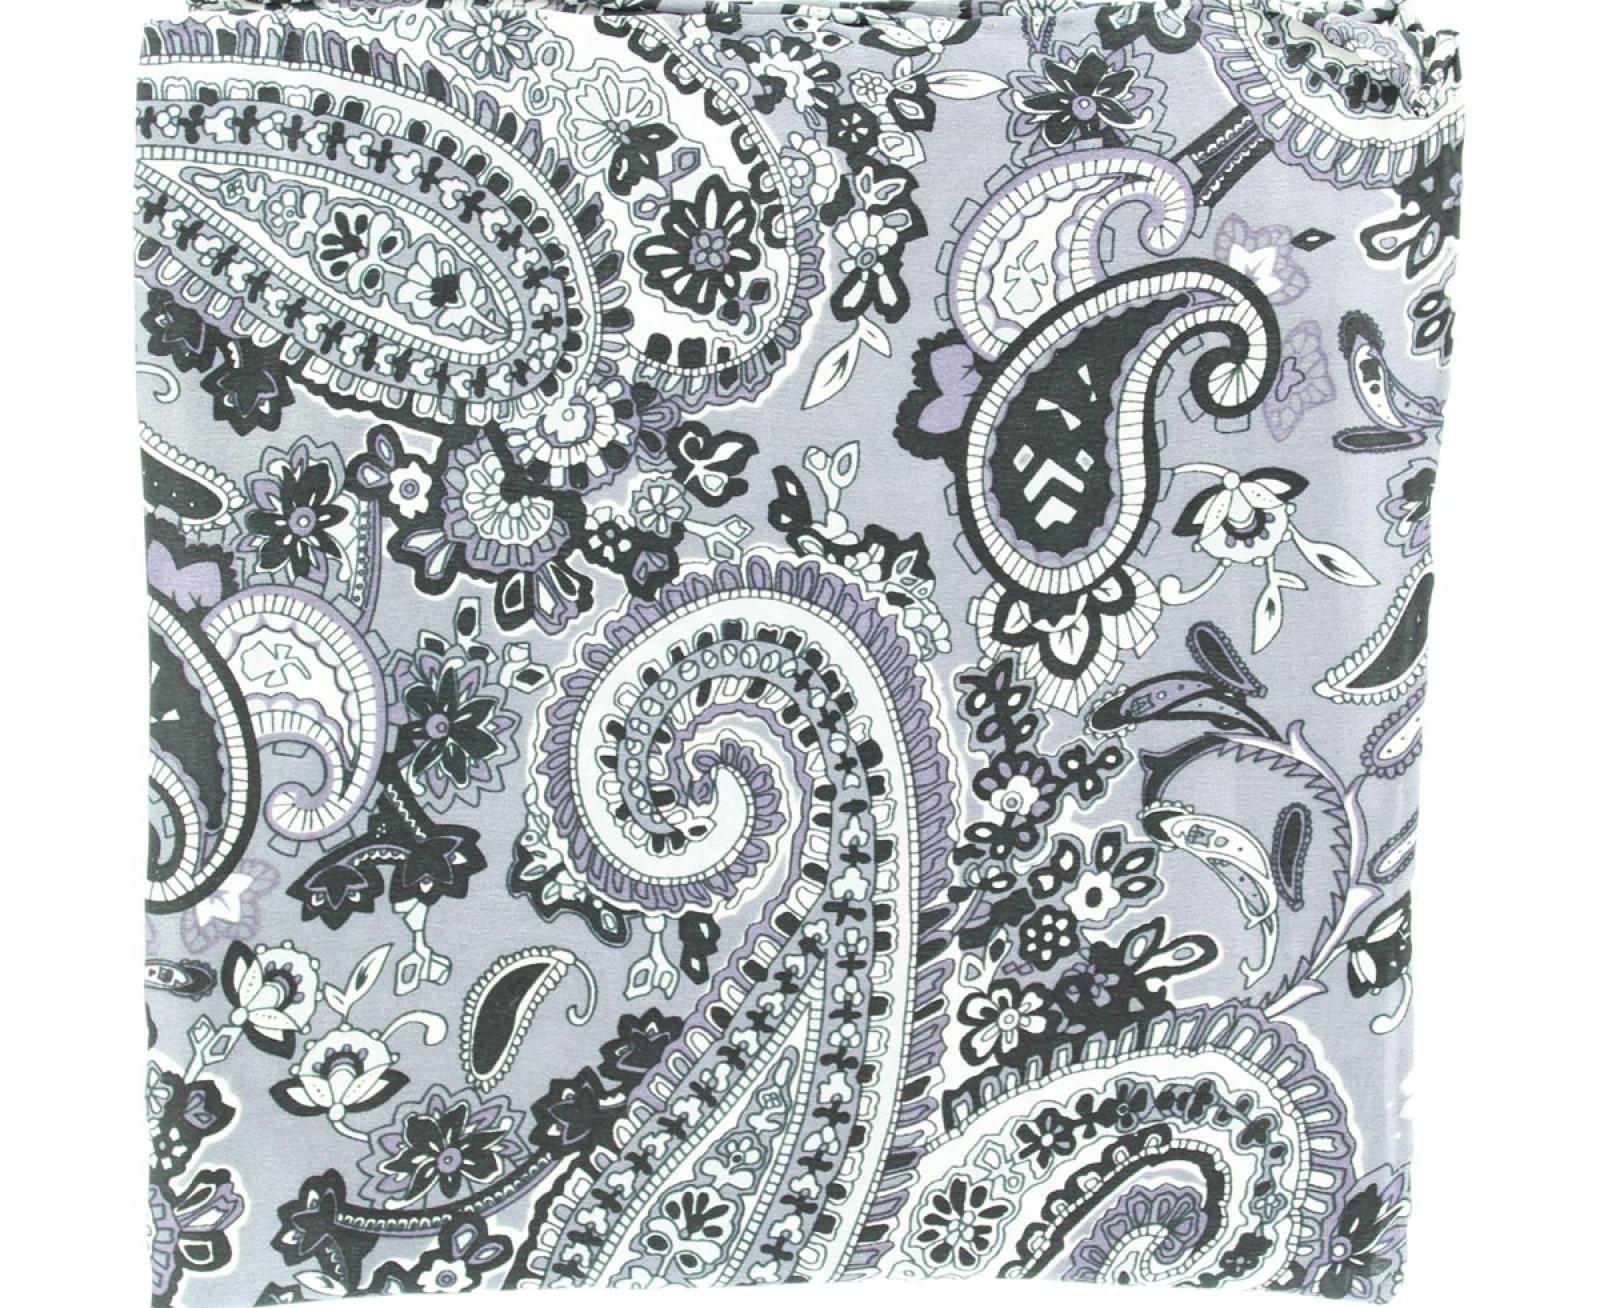 M&F Western Products Paisley Wild Rags Gray